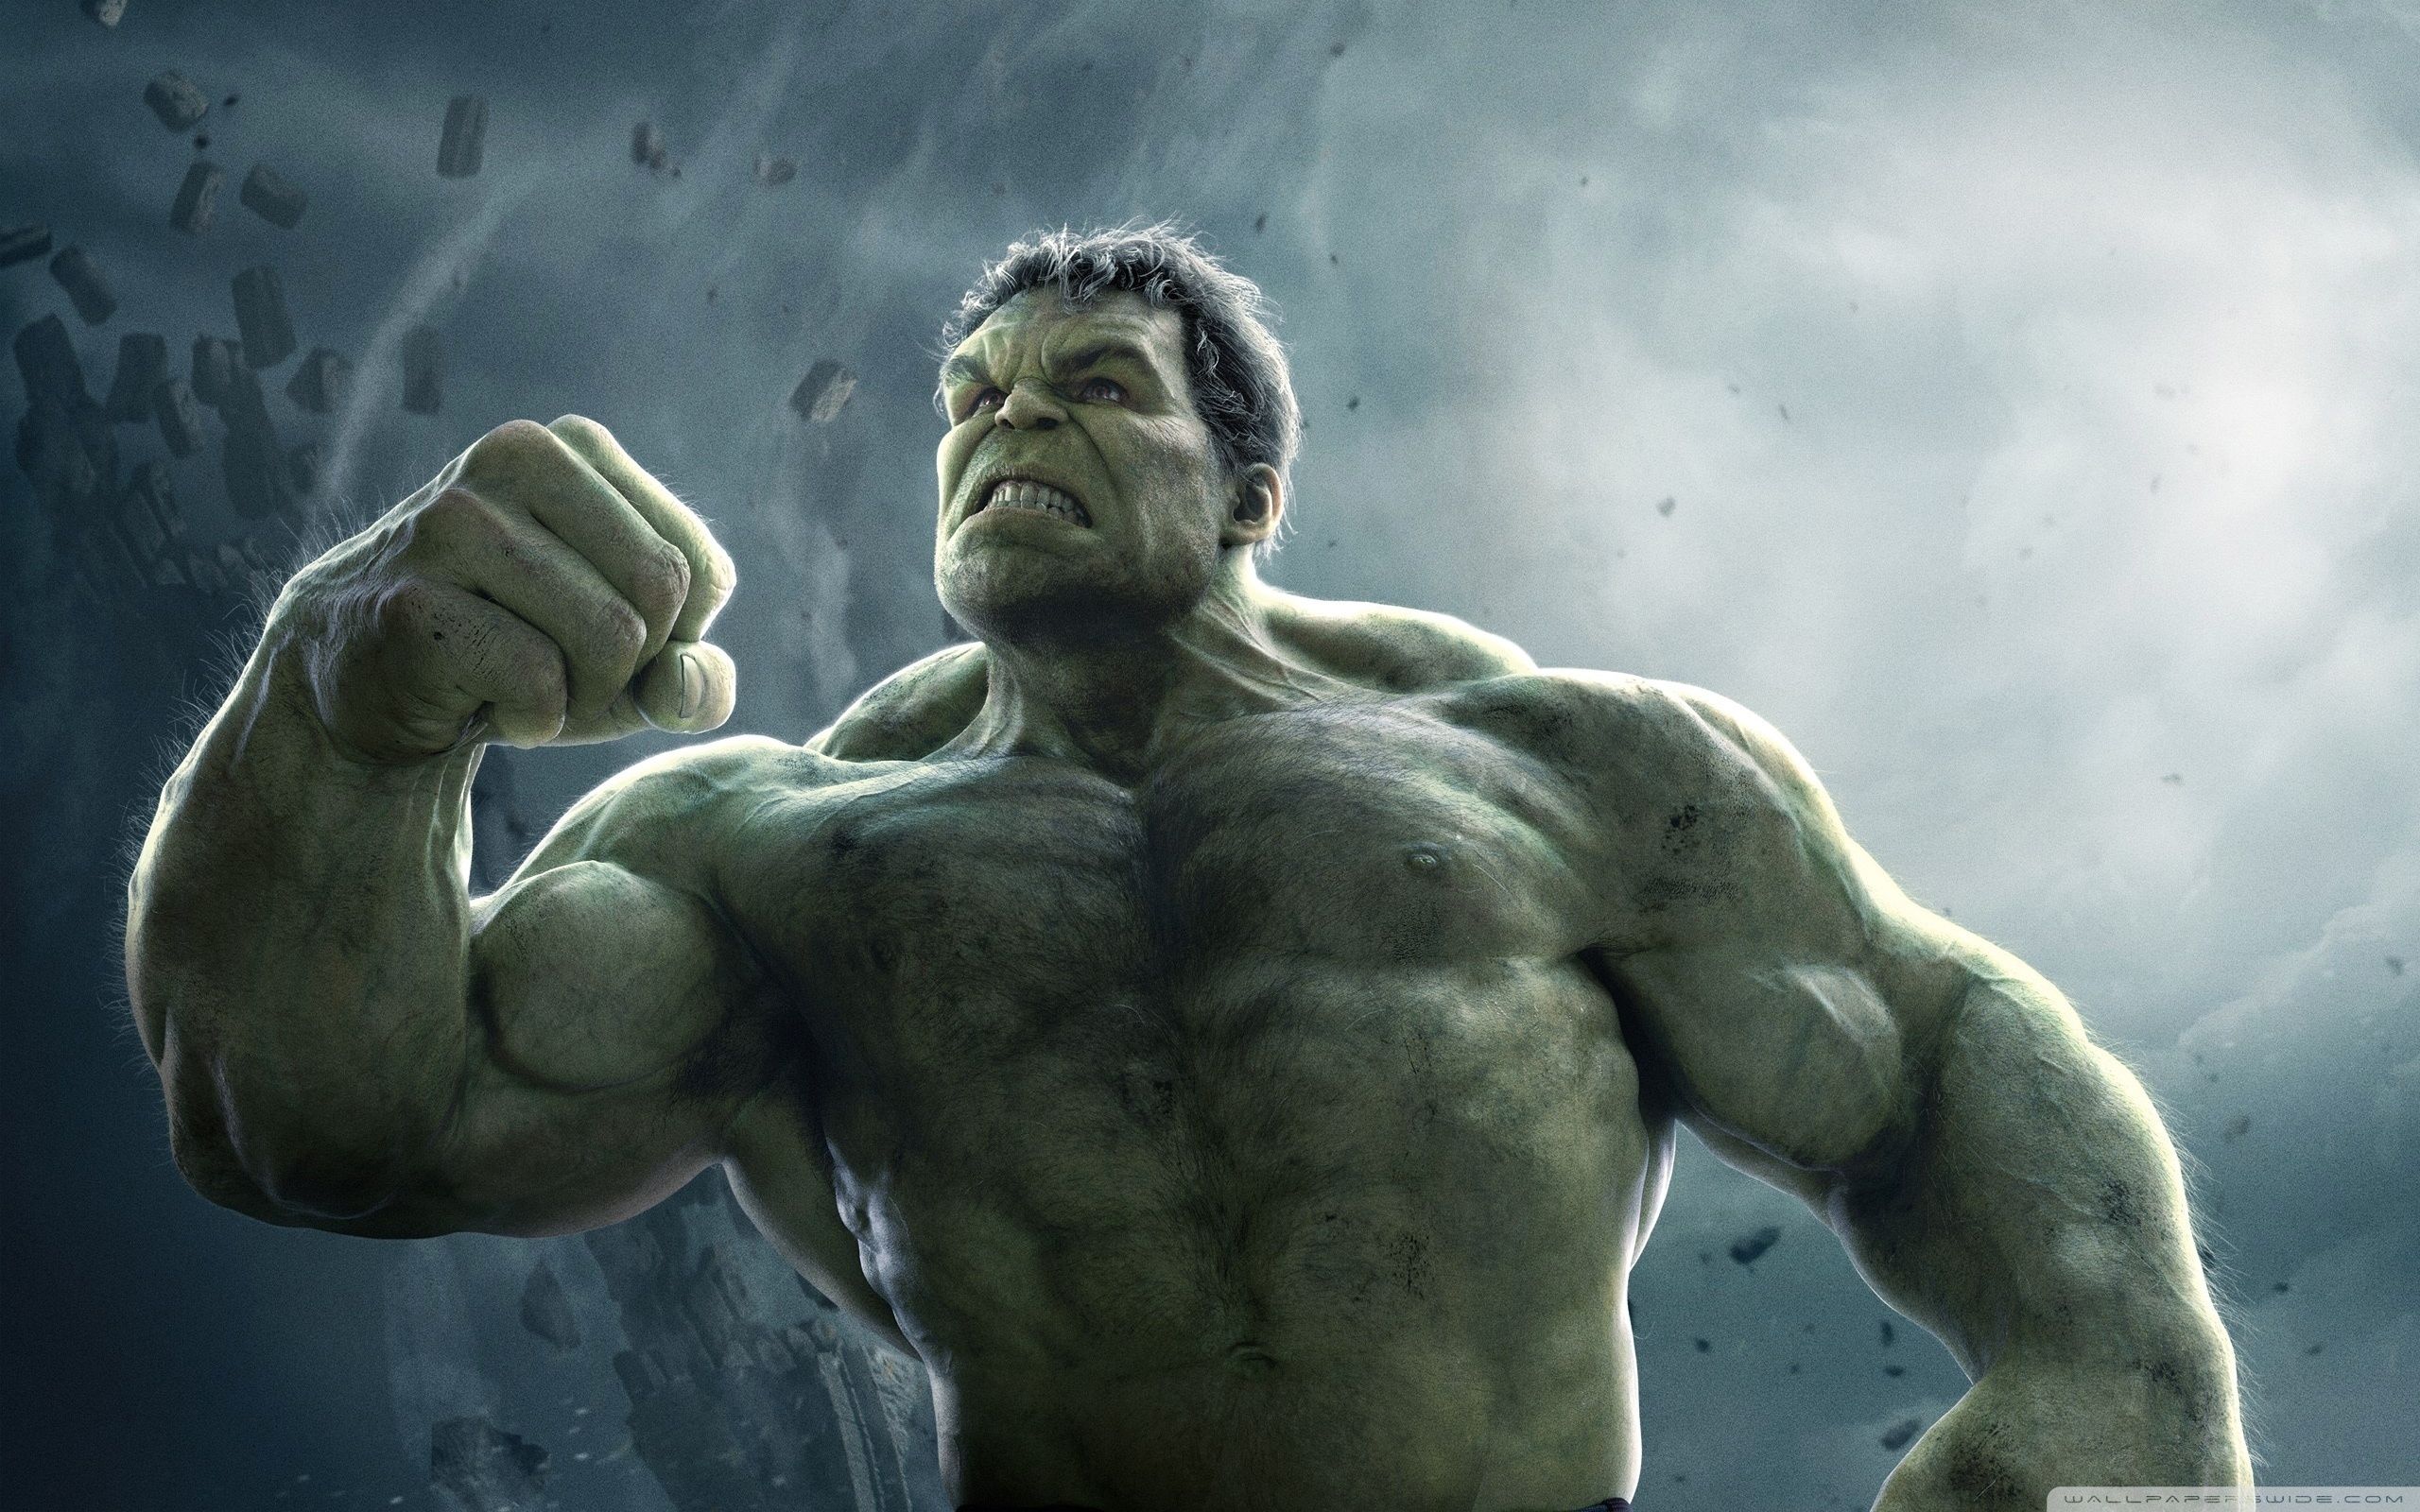 Hulk 4K wallpaper for your desktop or mobile screen free and easy to download